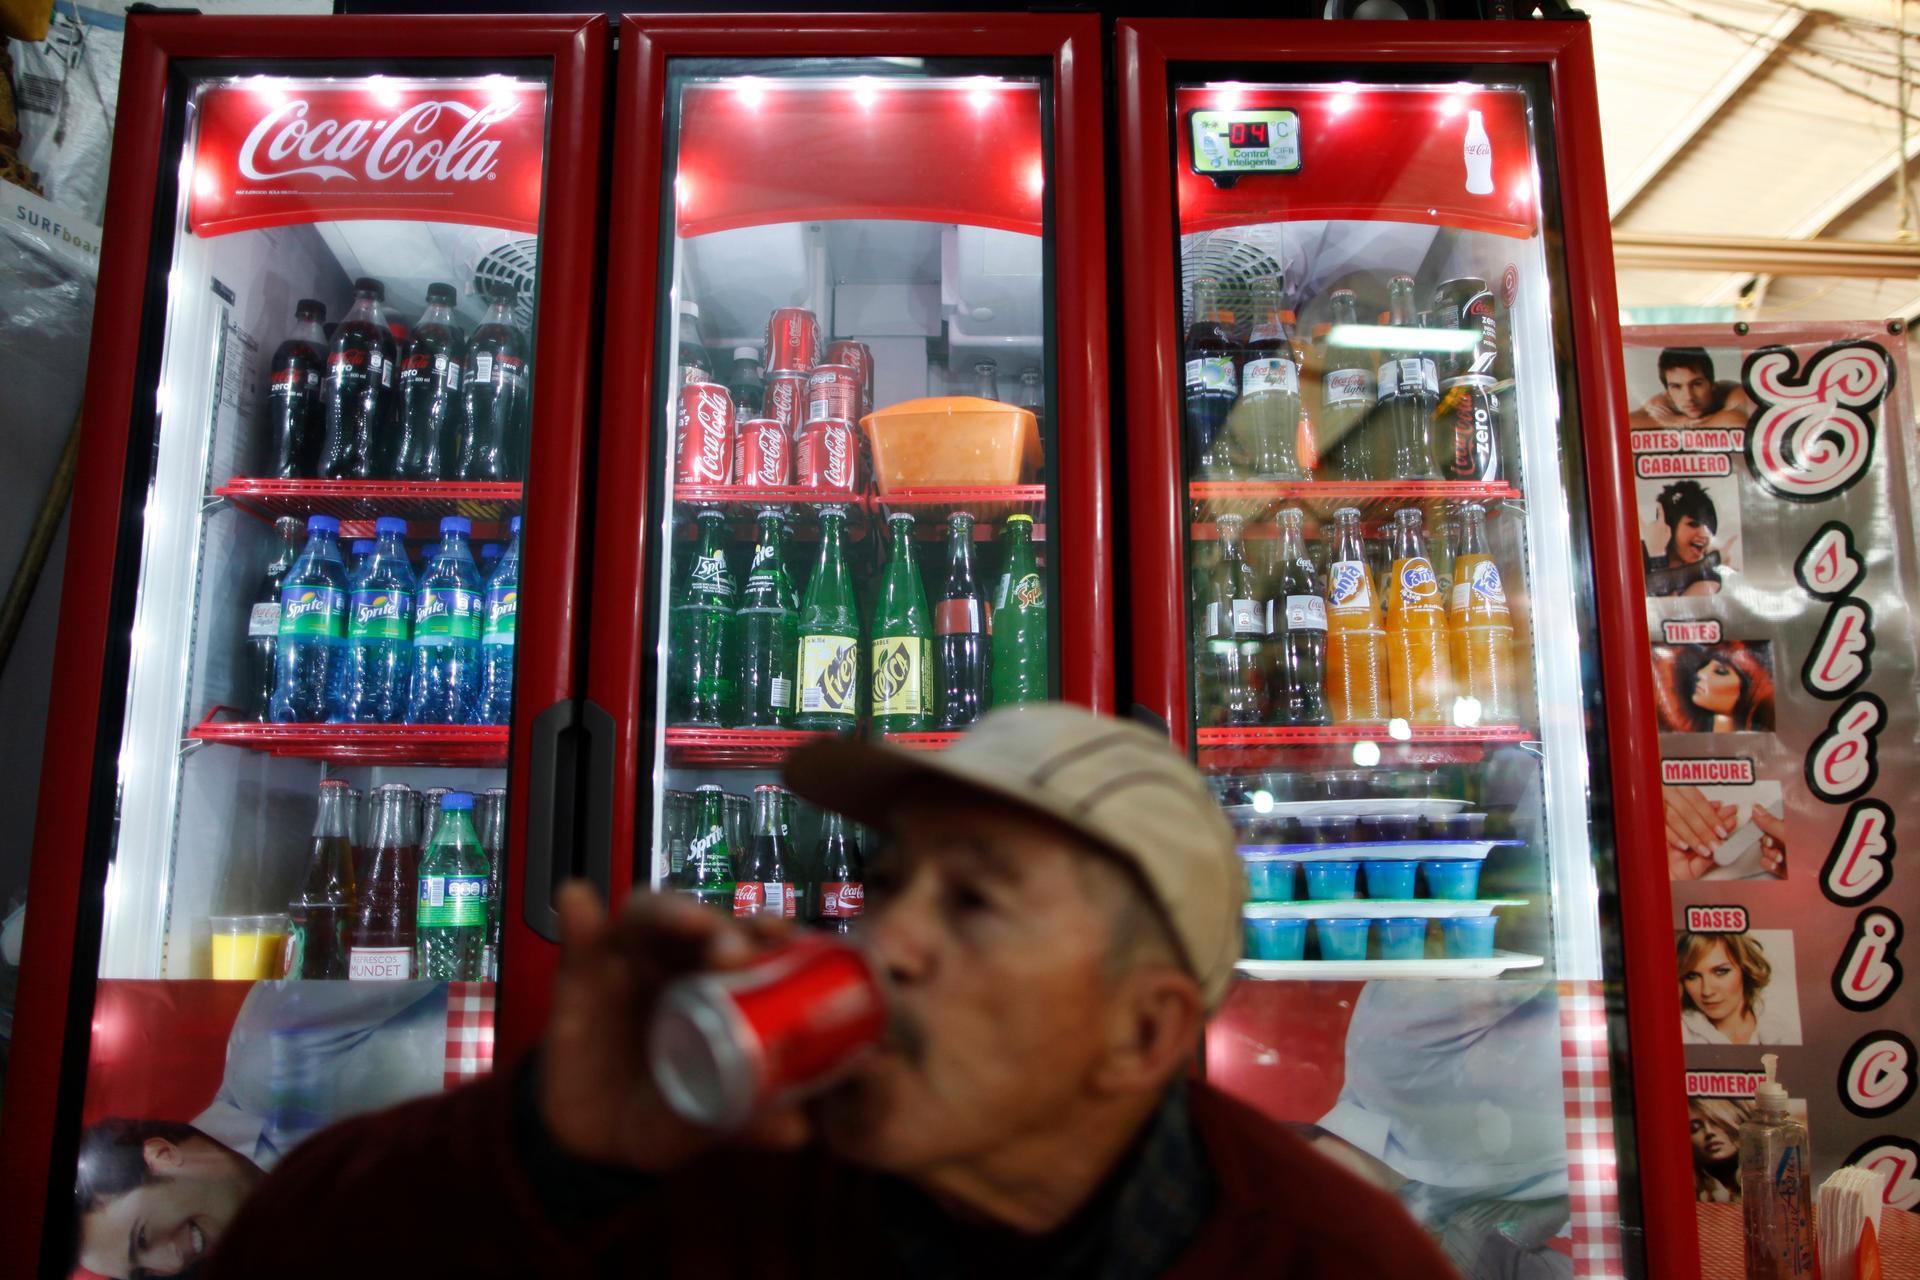 A man drinks a soft drink at a store in Mexico City. Last year, the Mexican government has imposed a 1 peso per liter tax on soda and sugary drinks to combat obesity.